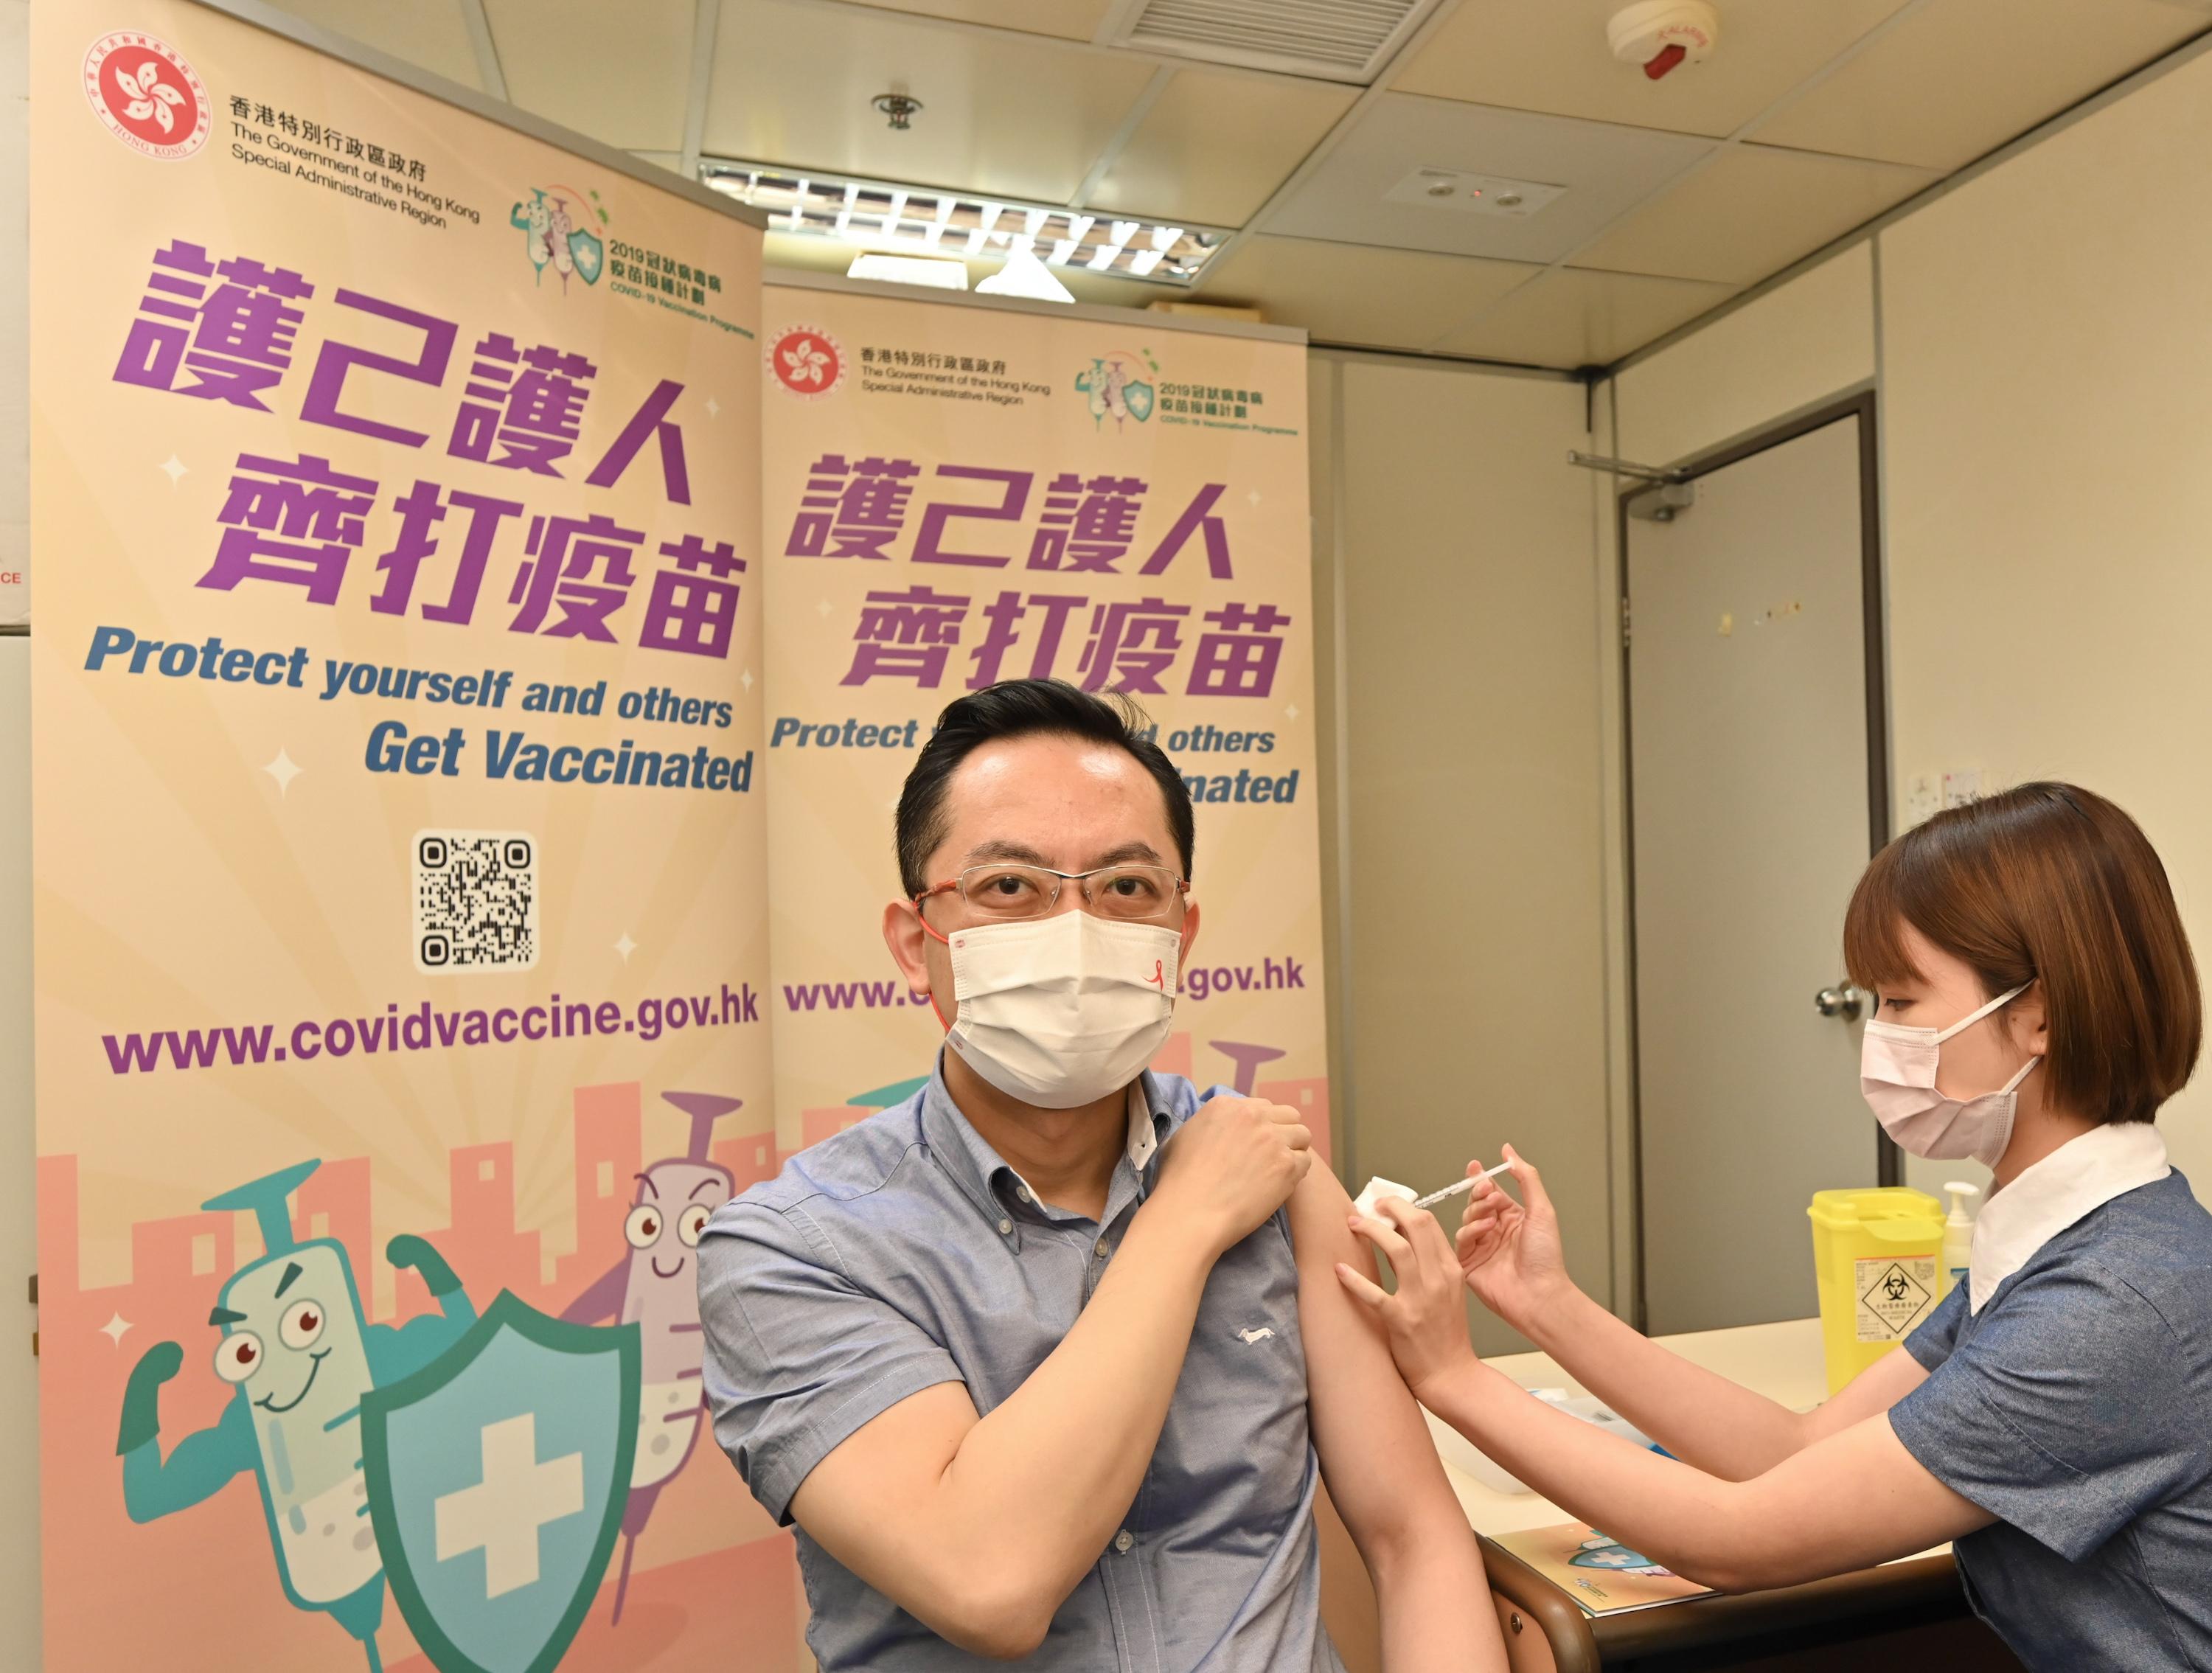 The Director of Health, Dr Ronald Lam, today (December 2) received his third dose of COVID-19 vaccination (CoronaVac) at a Department of Health clinic.